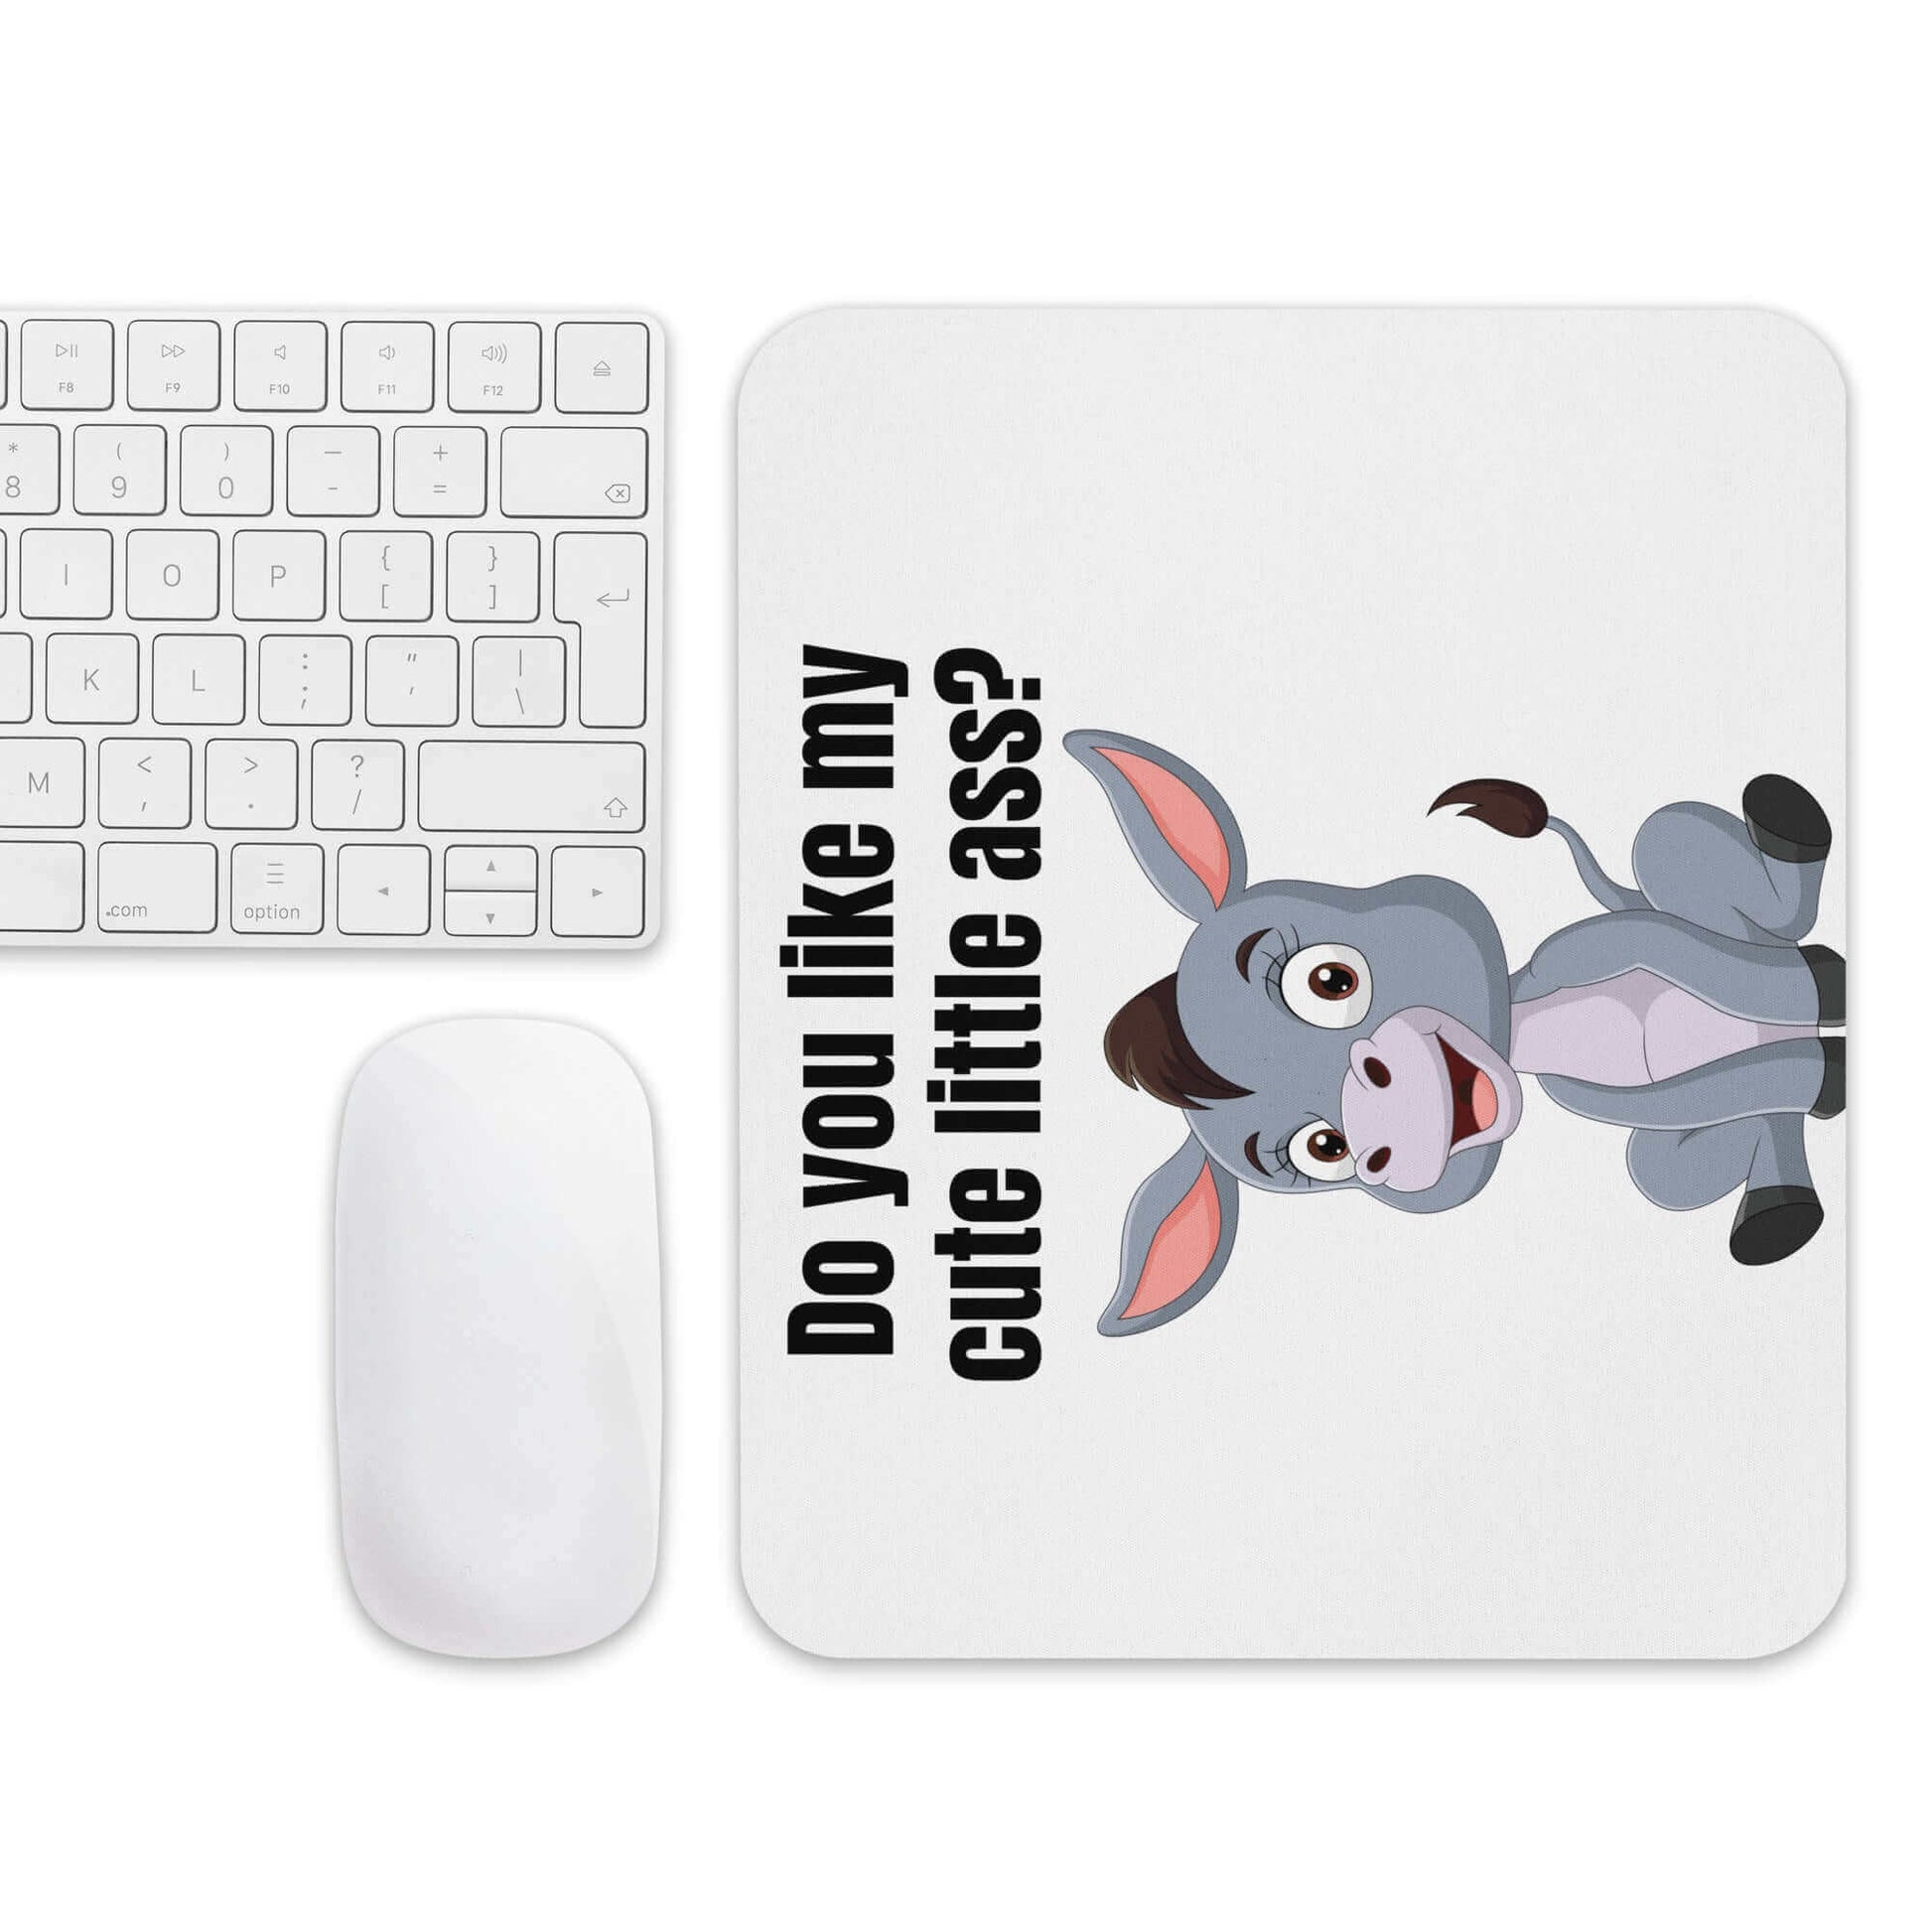 Do you like my cute little ass? - Mouse pad ass cute donkey funny gift for her gift for mom gift for wife little donkey